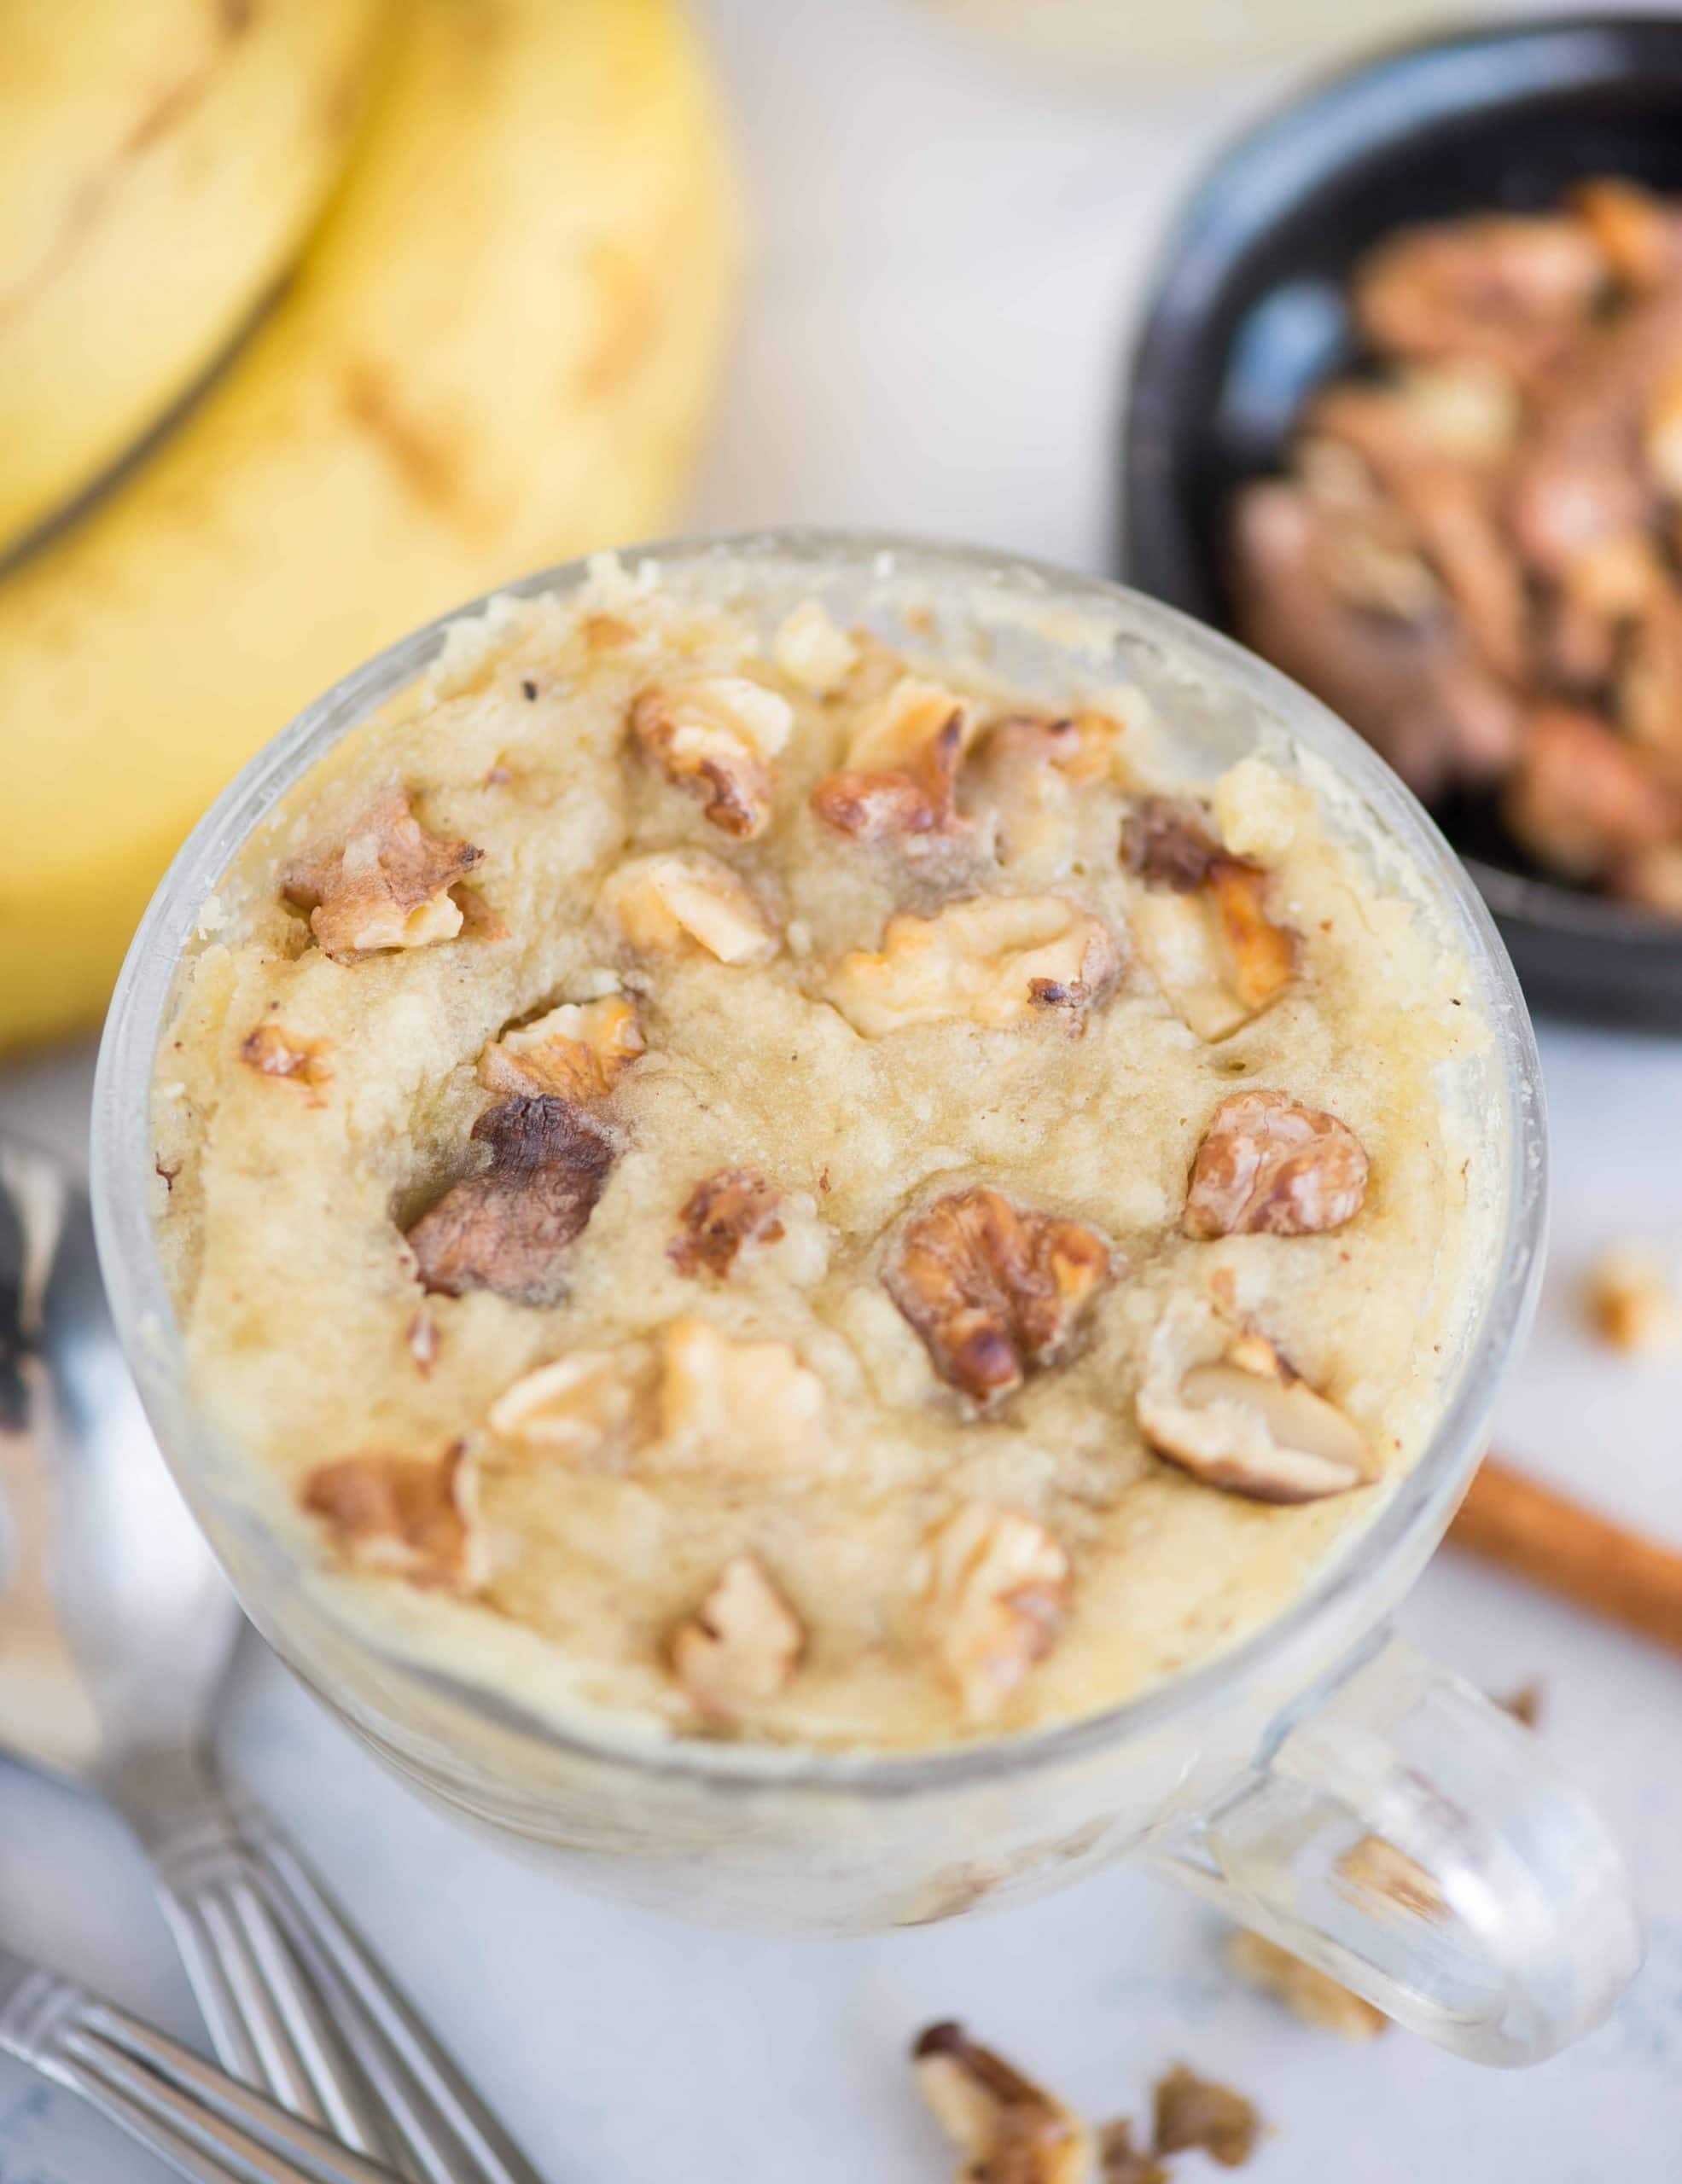 Moist microwave banana mug cake(eggless) takes 2 minutes to make. It tastes as good as banana bread but takes a fraction of its time to make. 